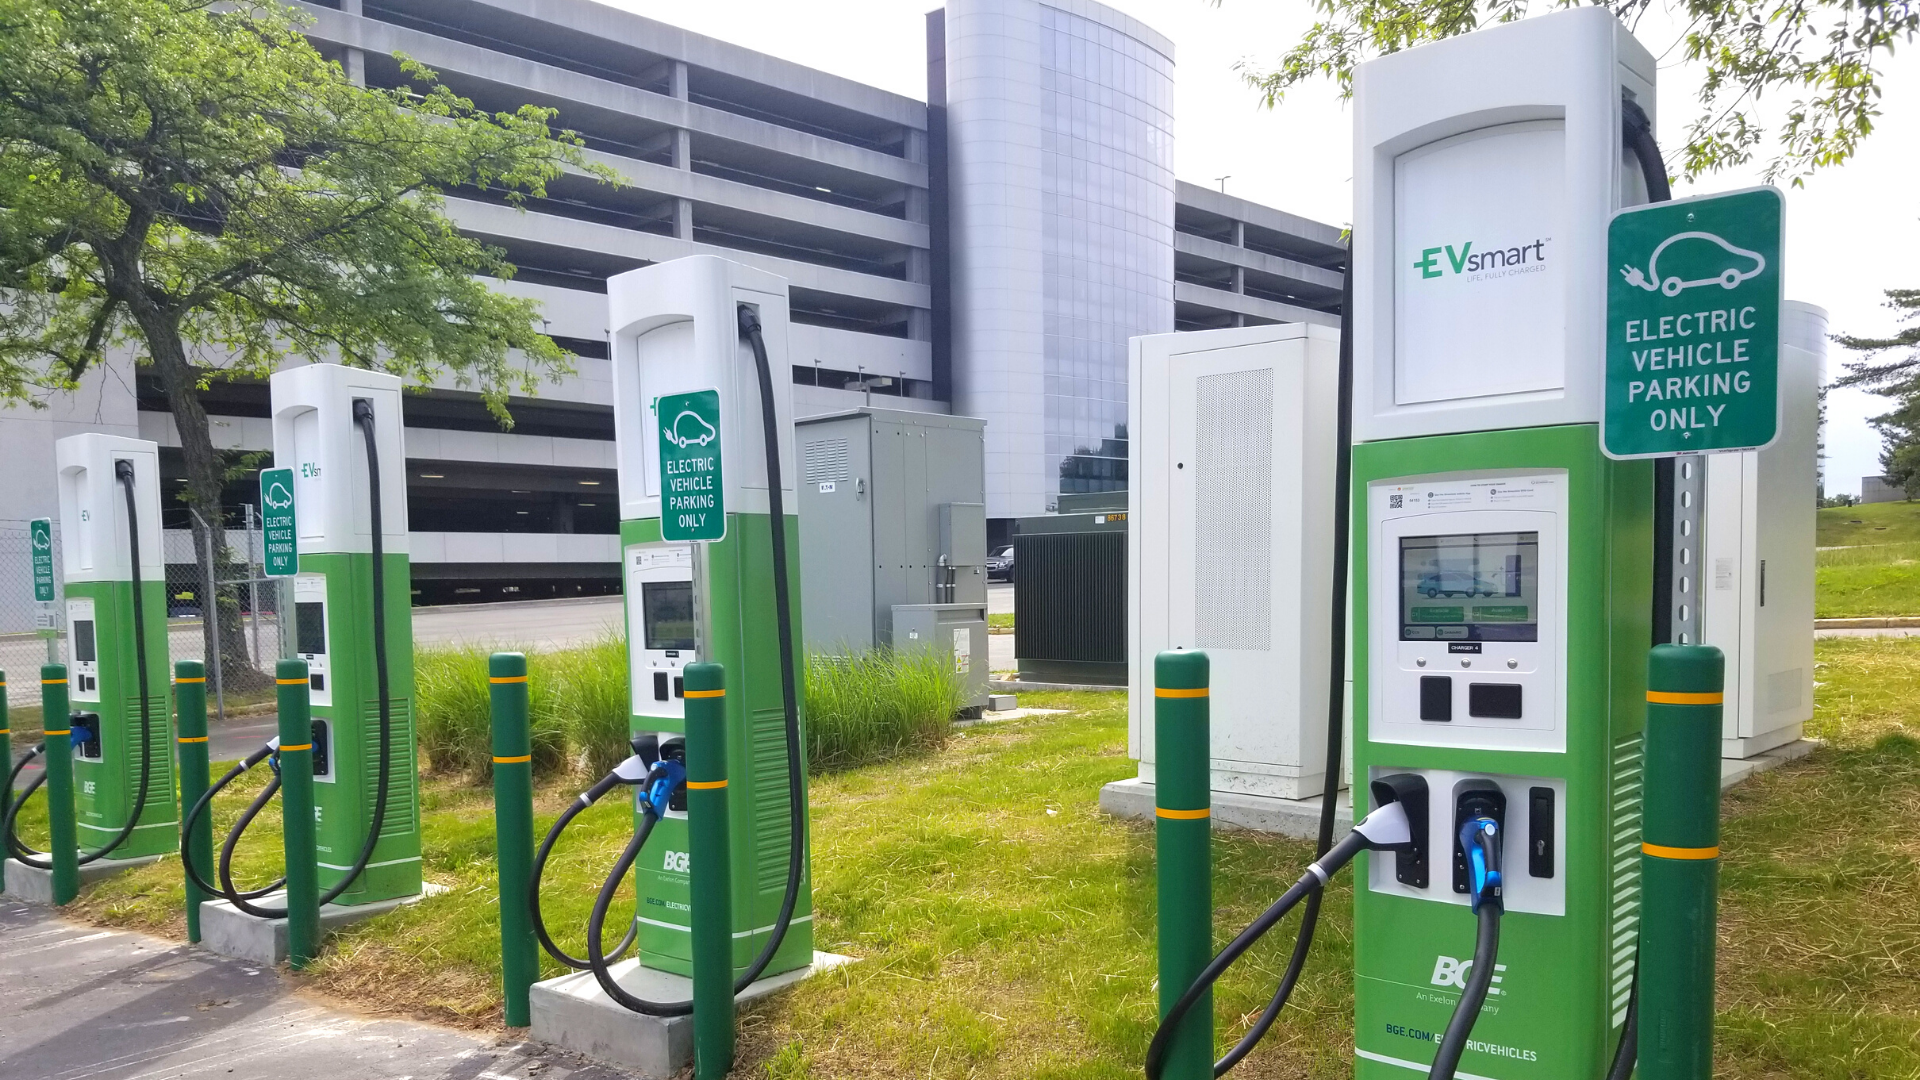 BWI Thurgood Marshall Airport and BGE Celebrate New Electric Vehicle Charging Stations